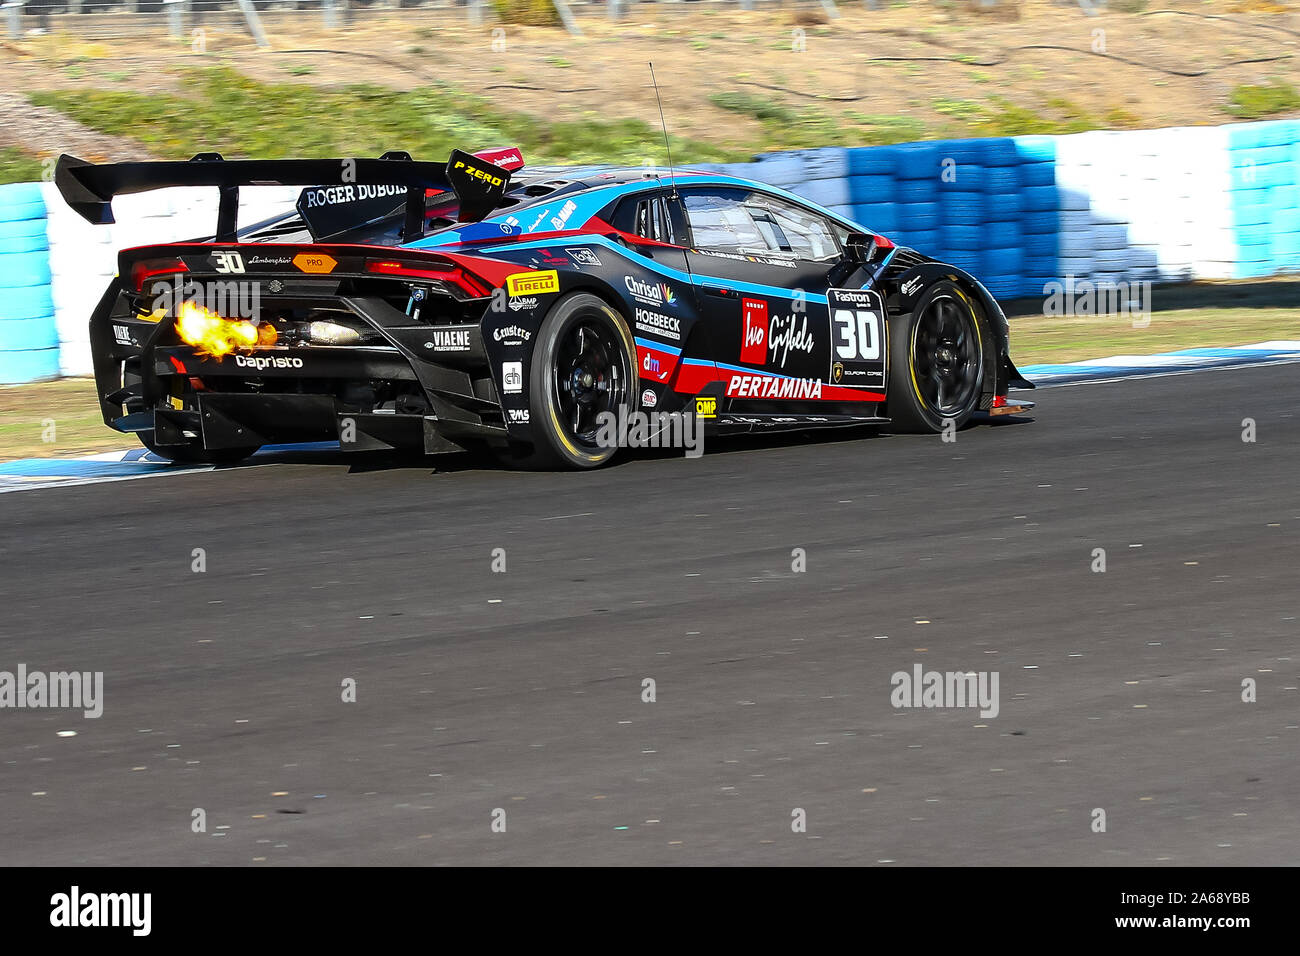 Jerez, Spain. 24th Oct 2019. Free practice and Qualify USA ASIA EU Super Trofeo World Final Lamborghini Jerez 2019, some of the protagonists of the classification Credit: Javier Galvez/Alamy Live News Stock Photo